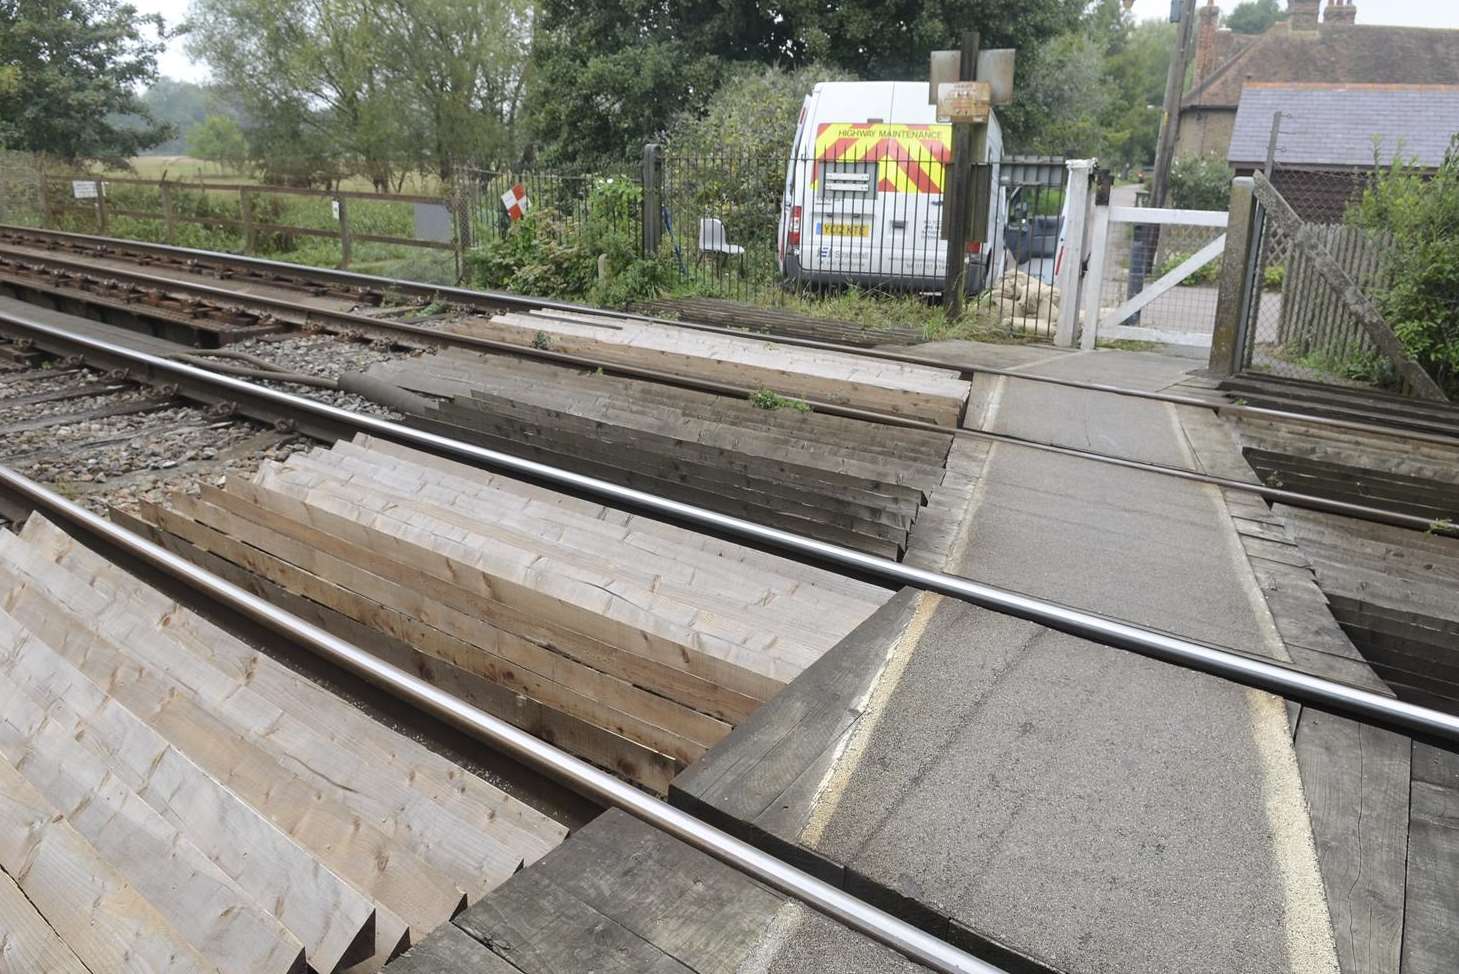 A man died on the tracks at a foot crossing near Chartham station